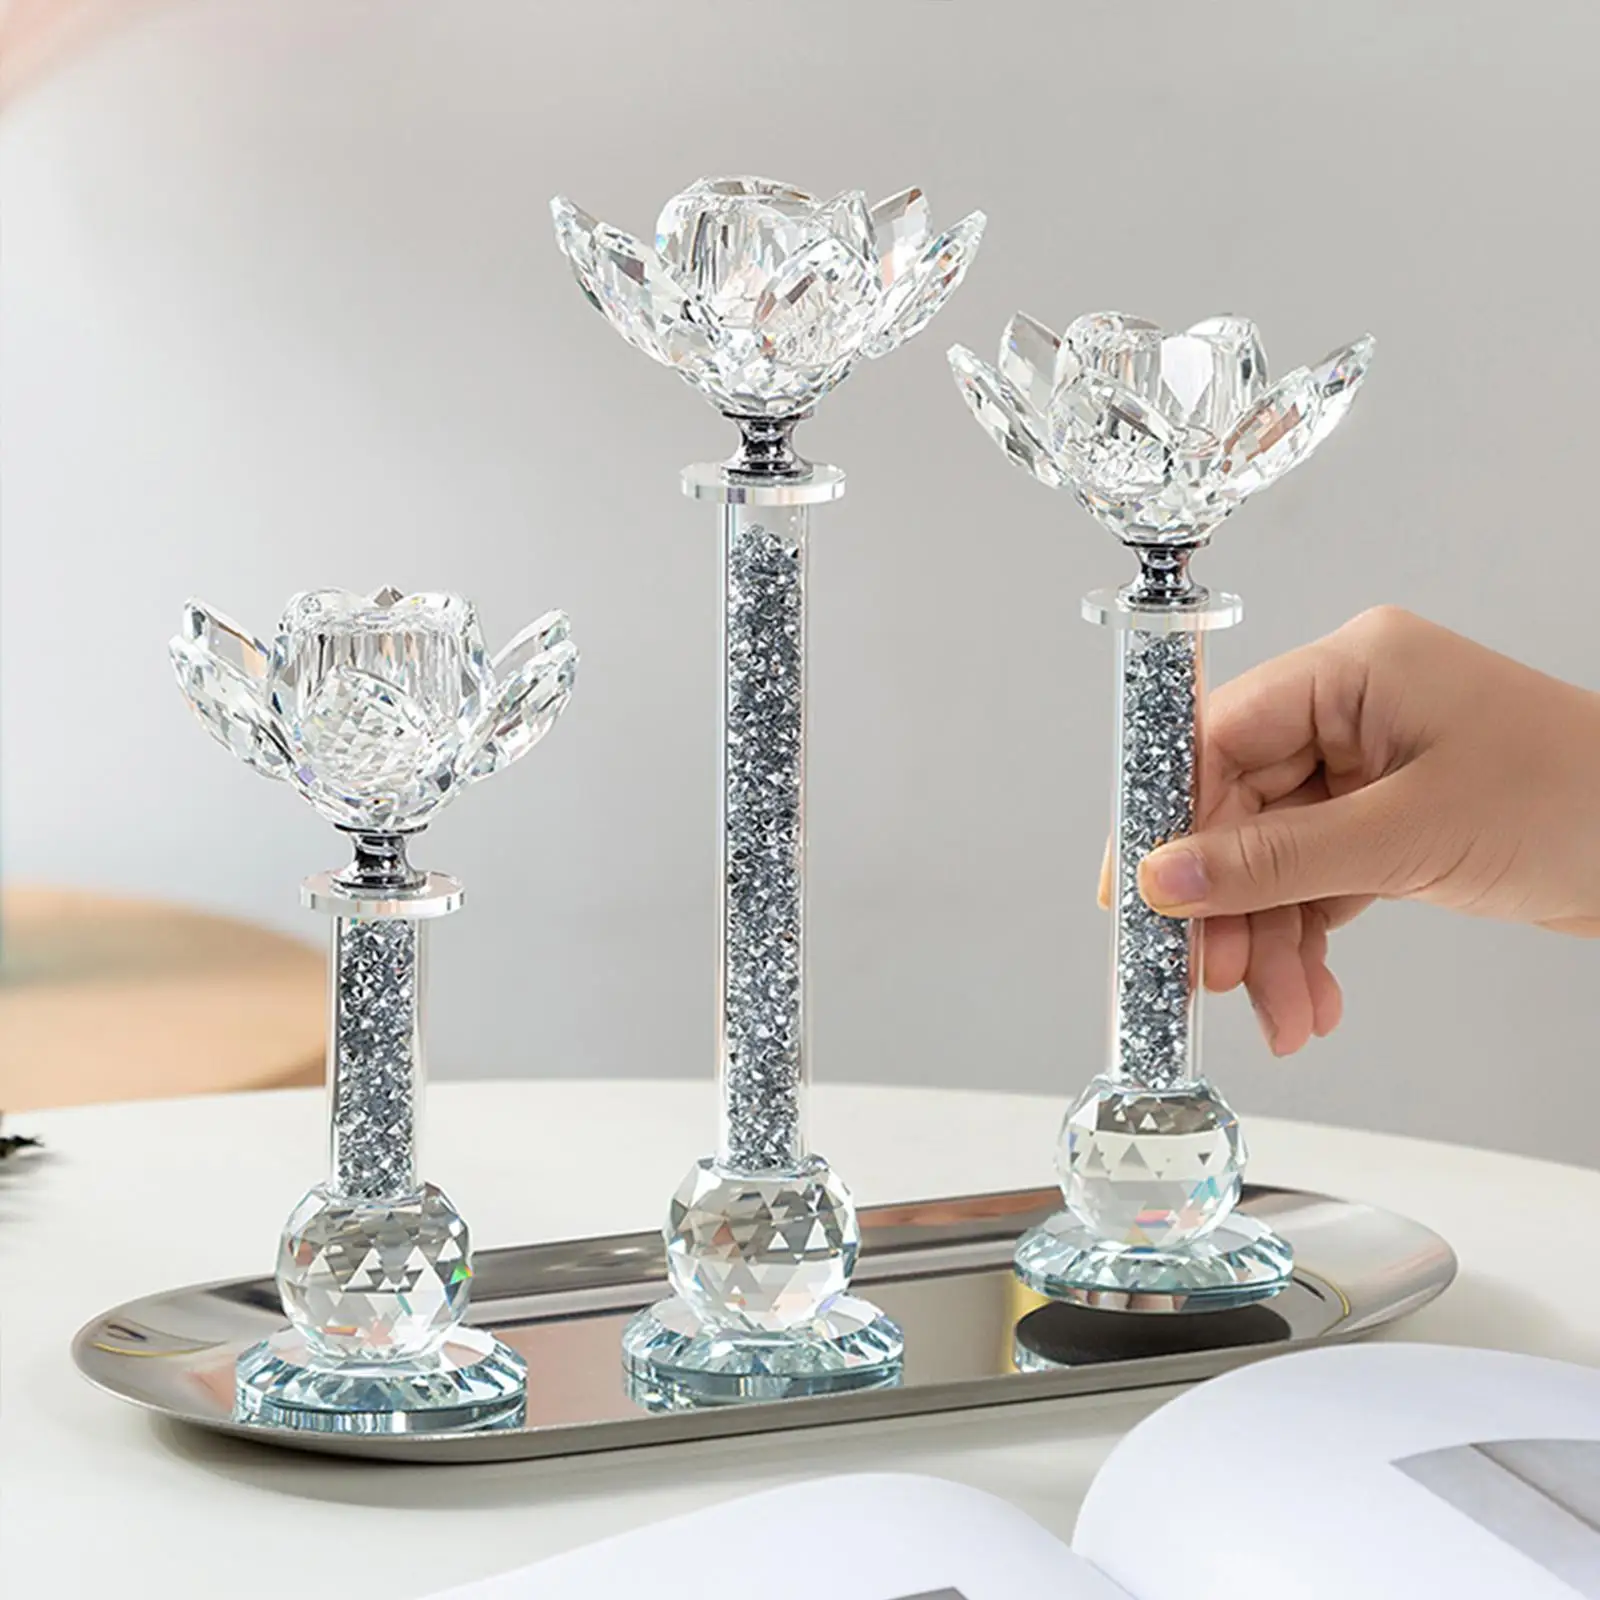 3Pcs Pillar Candle Holder Candlestick European Elegant Votive Candle Stand for Home Table Centerpiece Party Decoration Gift